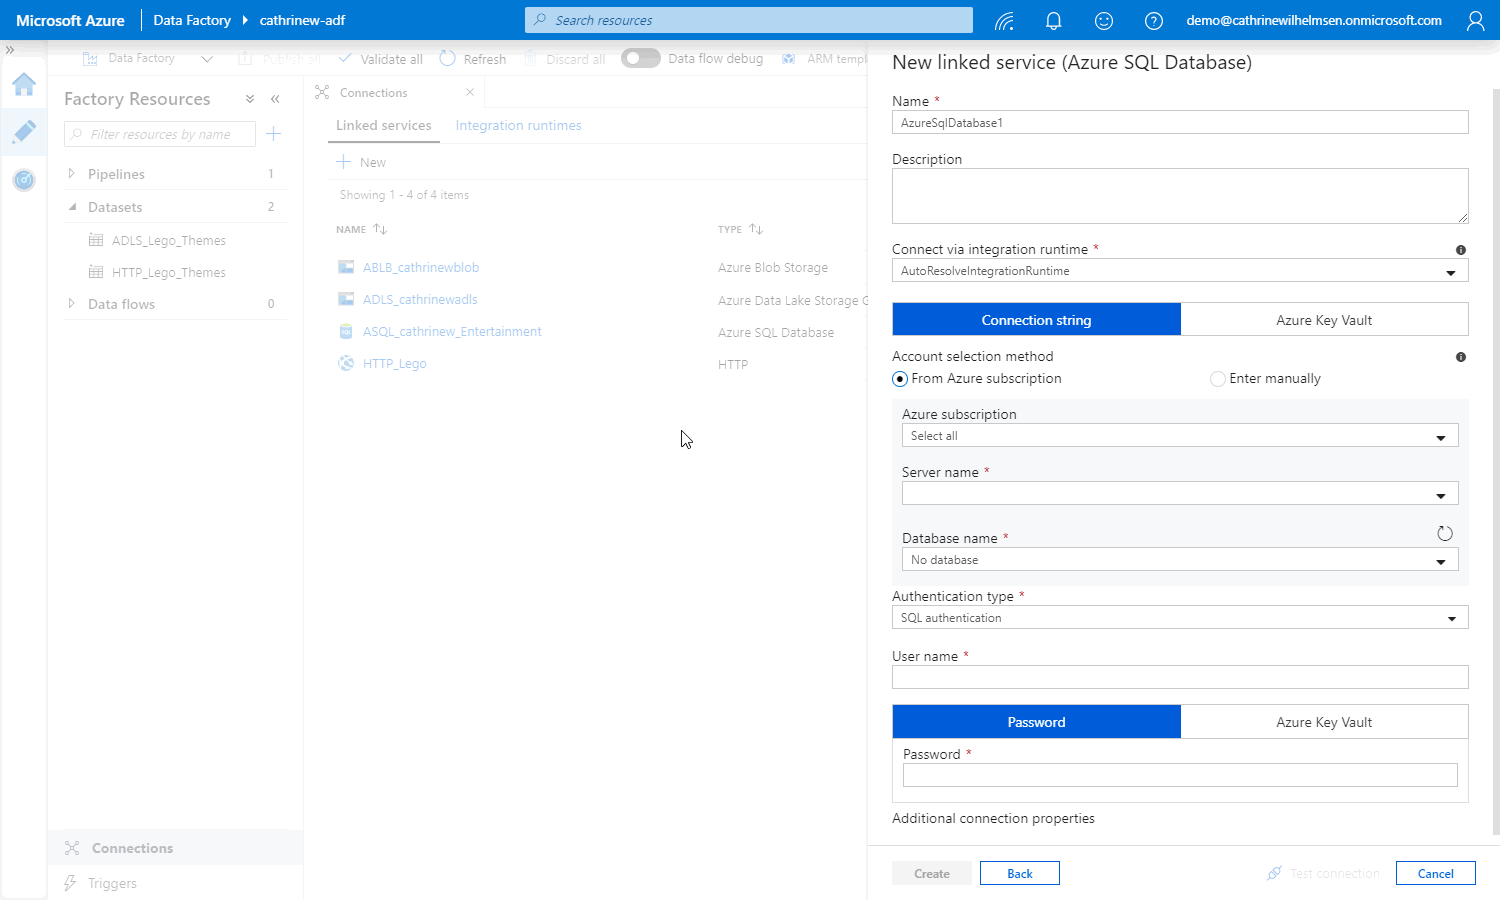 Screenshot of the new linked service pane, showing the properties for an Azure SQL Database